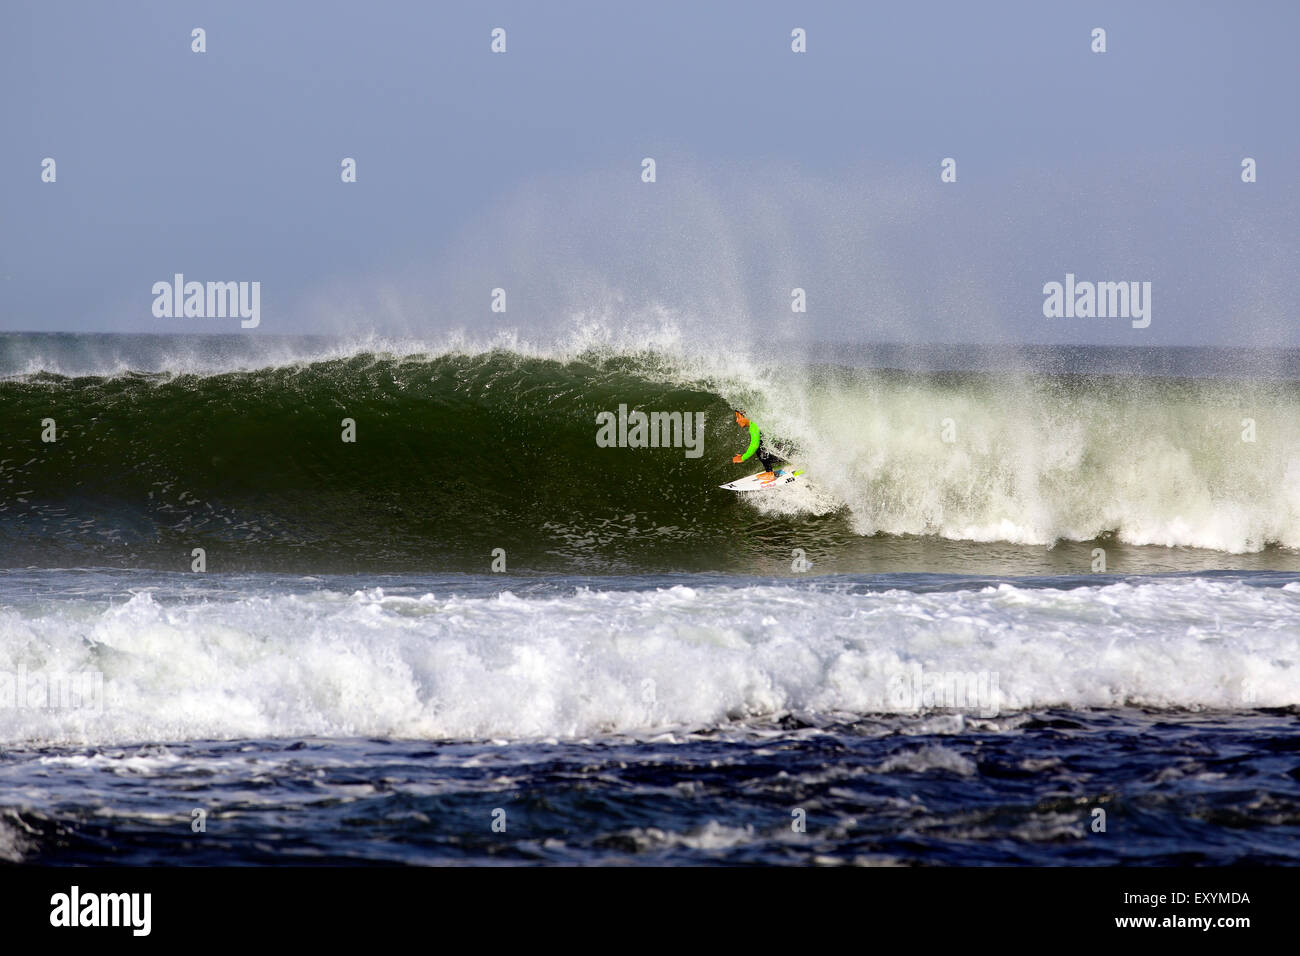 Australian surfer Julian Wilson in the barrel while surfing a wave at Jeffreys Bay, South Africa Stock Photo